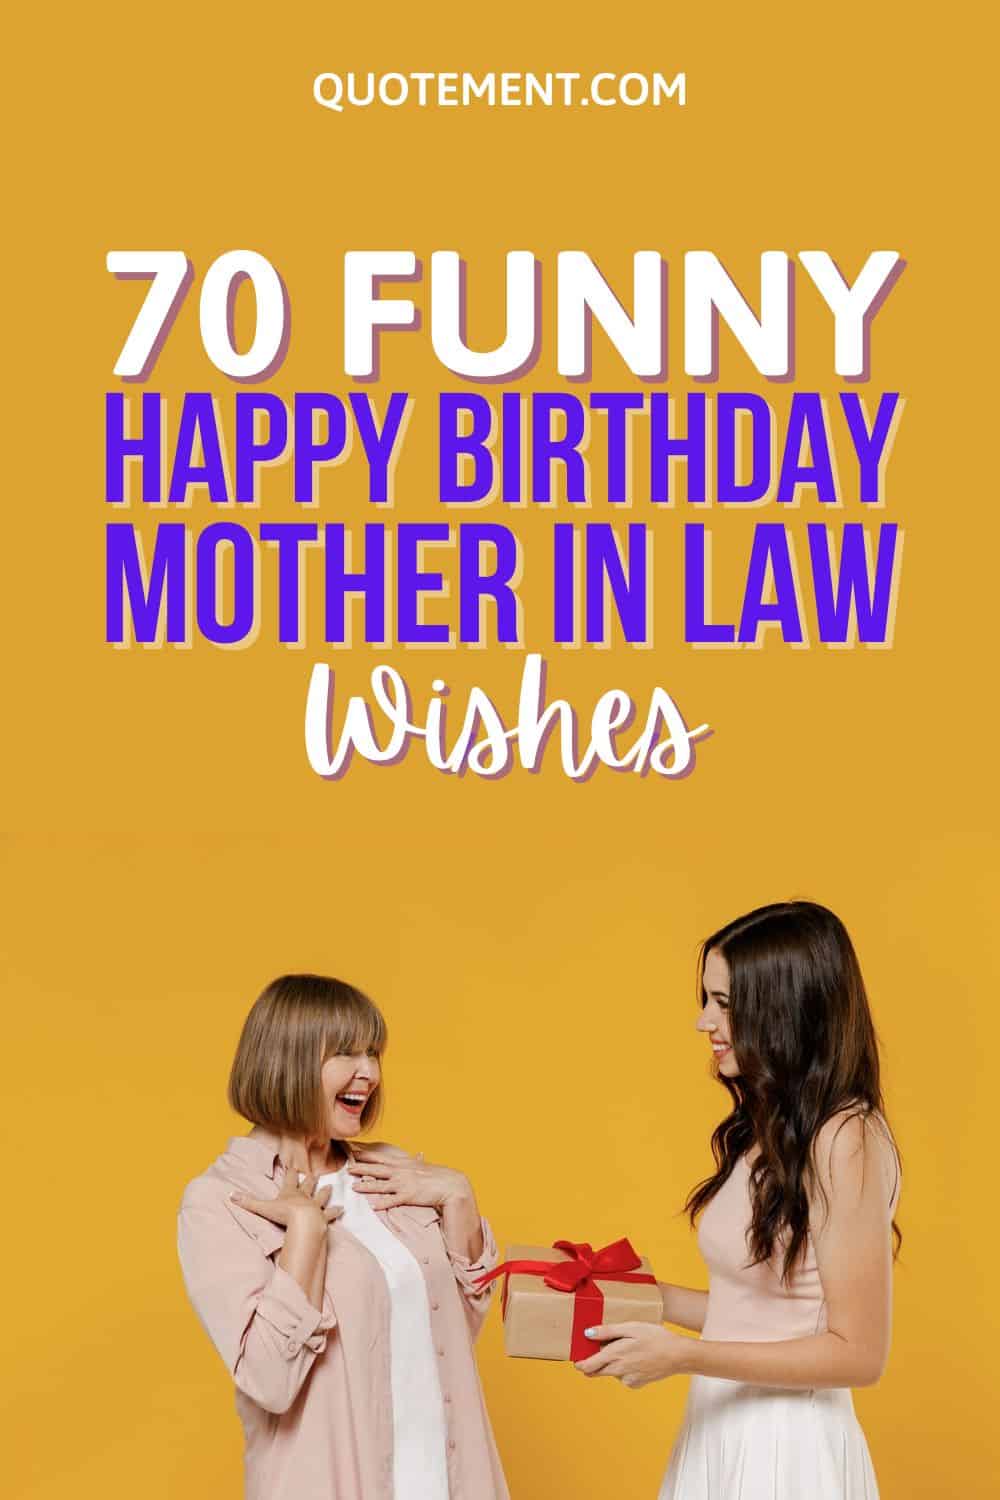 70 Super Funny Happy Birthday Mother In Law Wishes